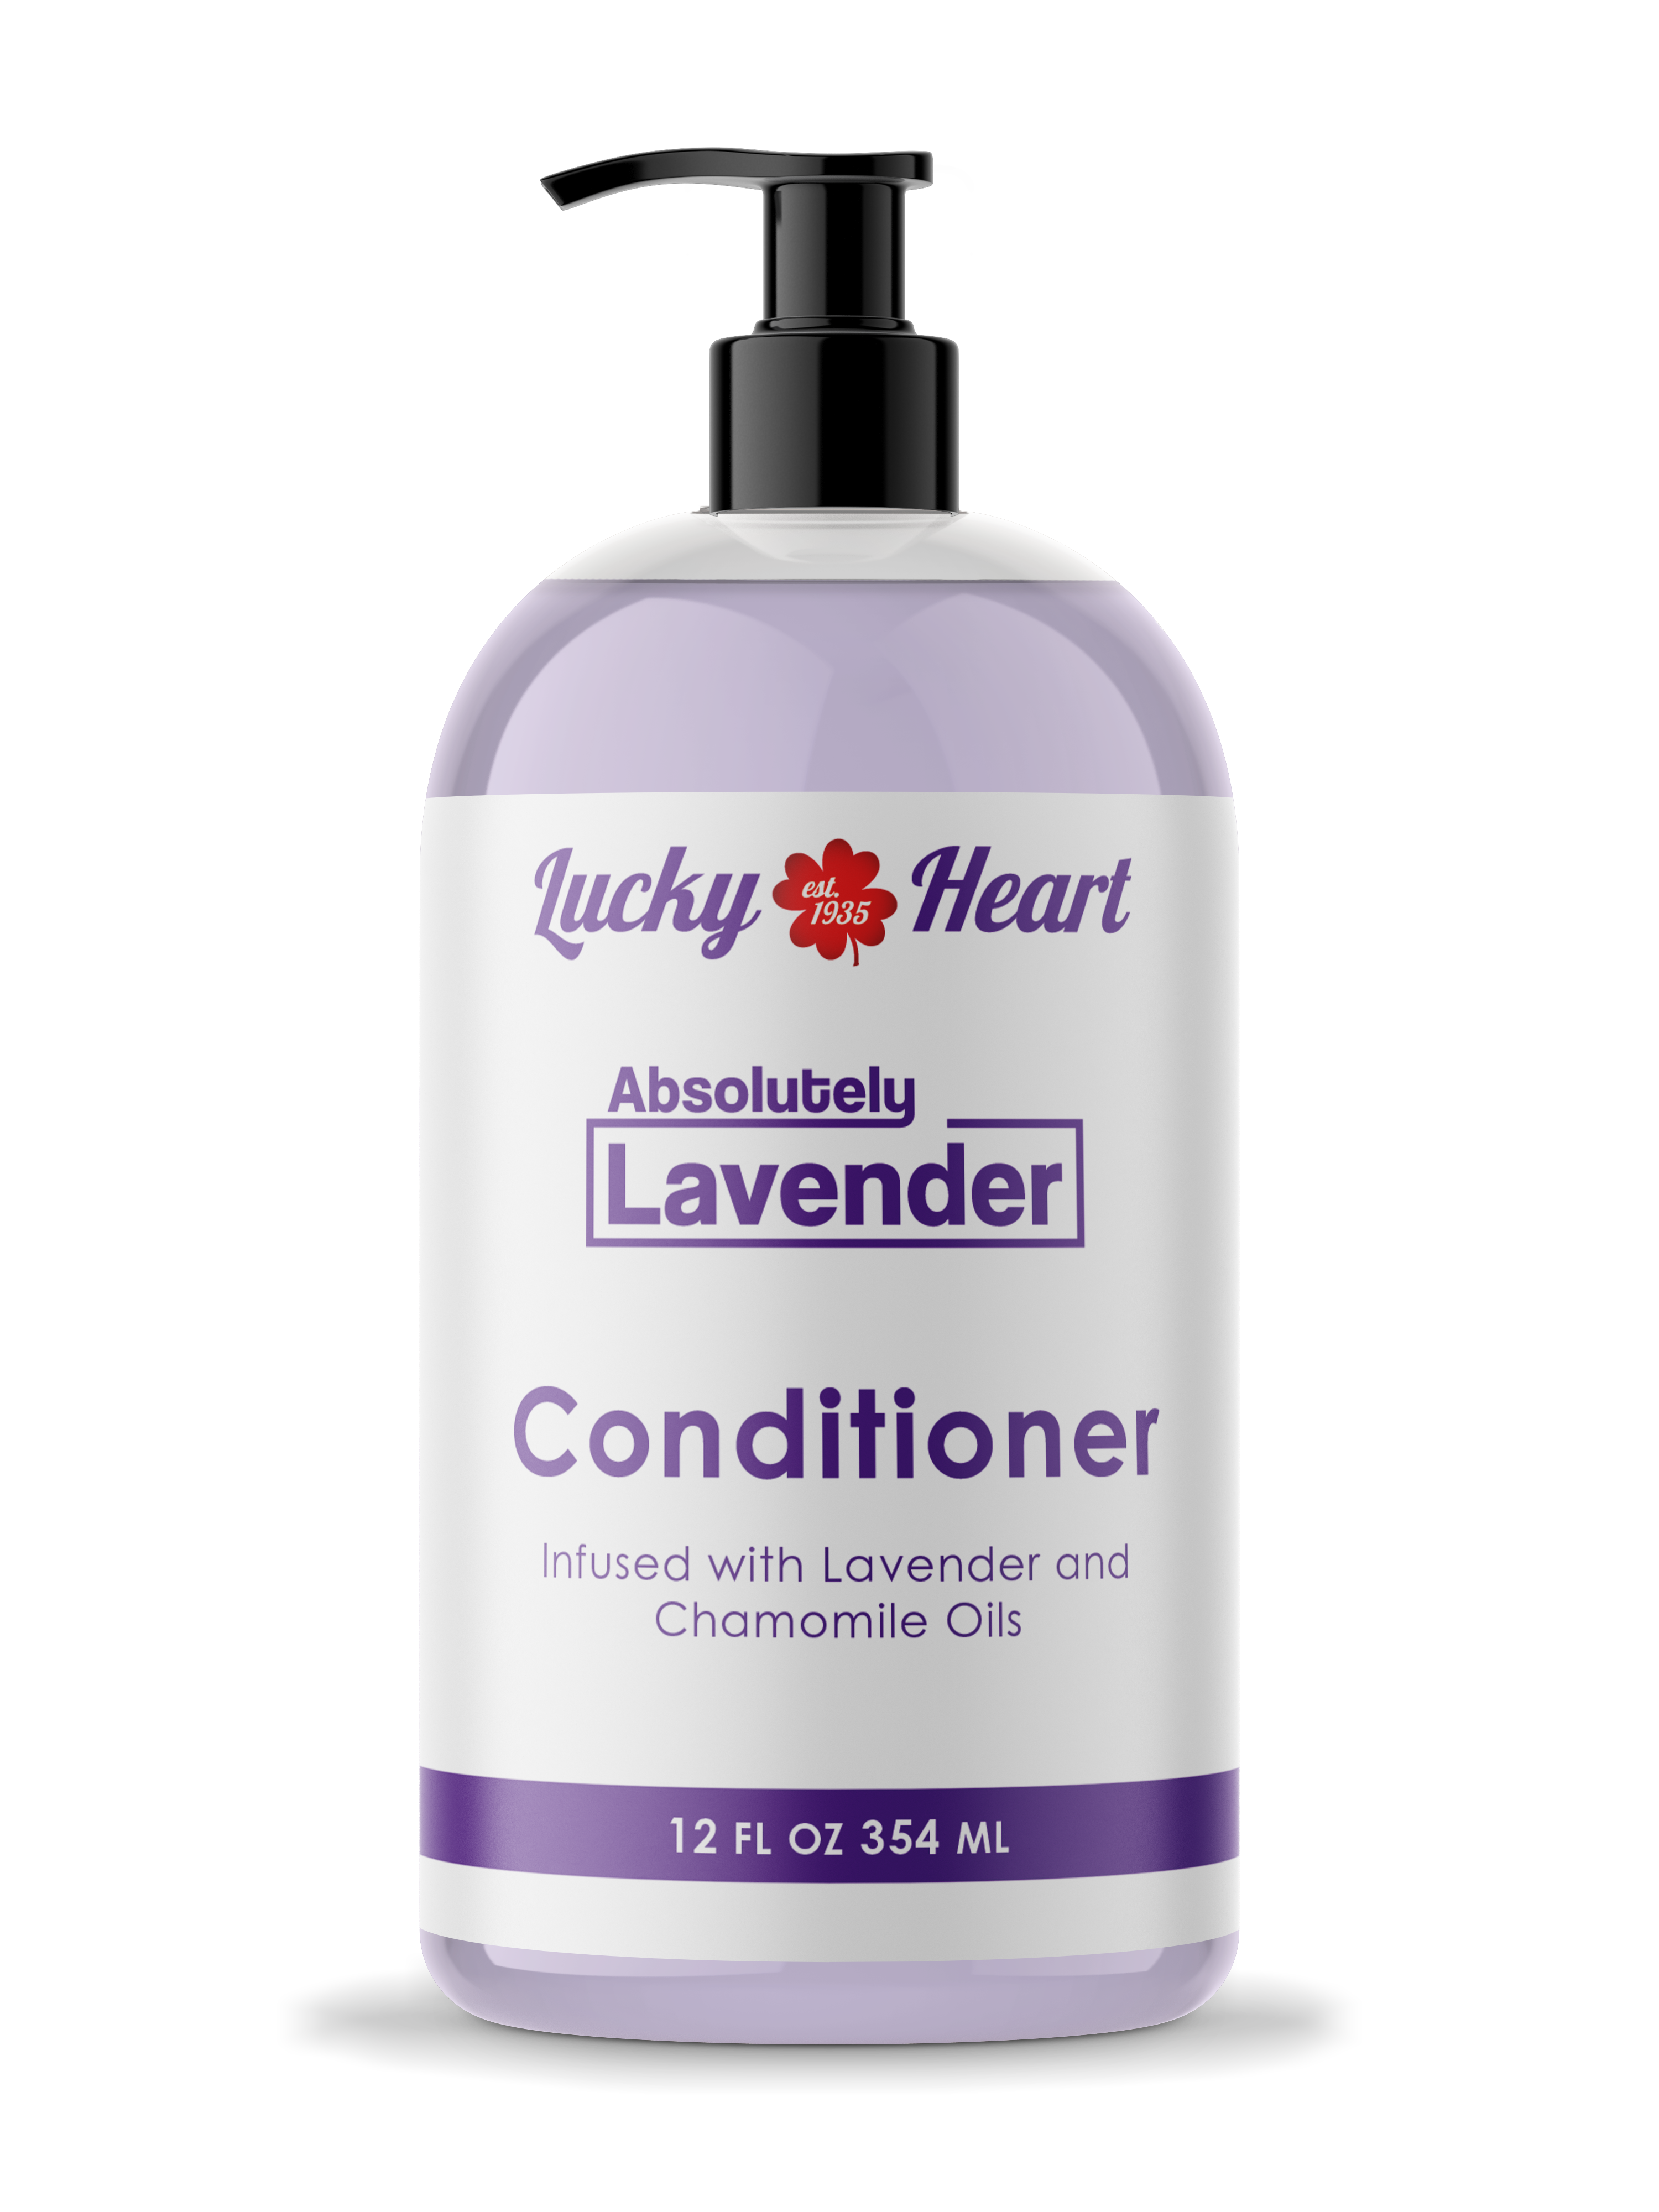 Absolutely Lavender Conditioner